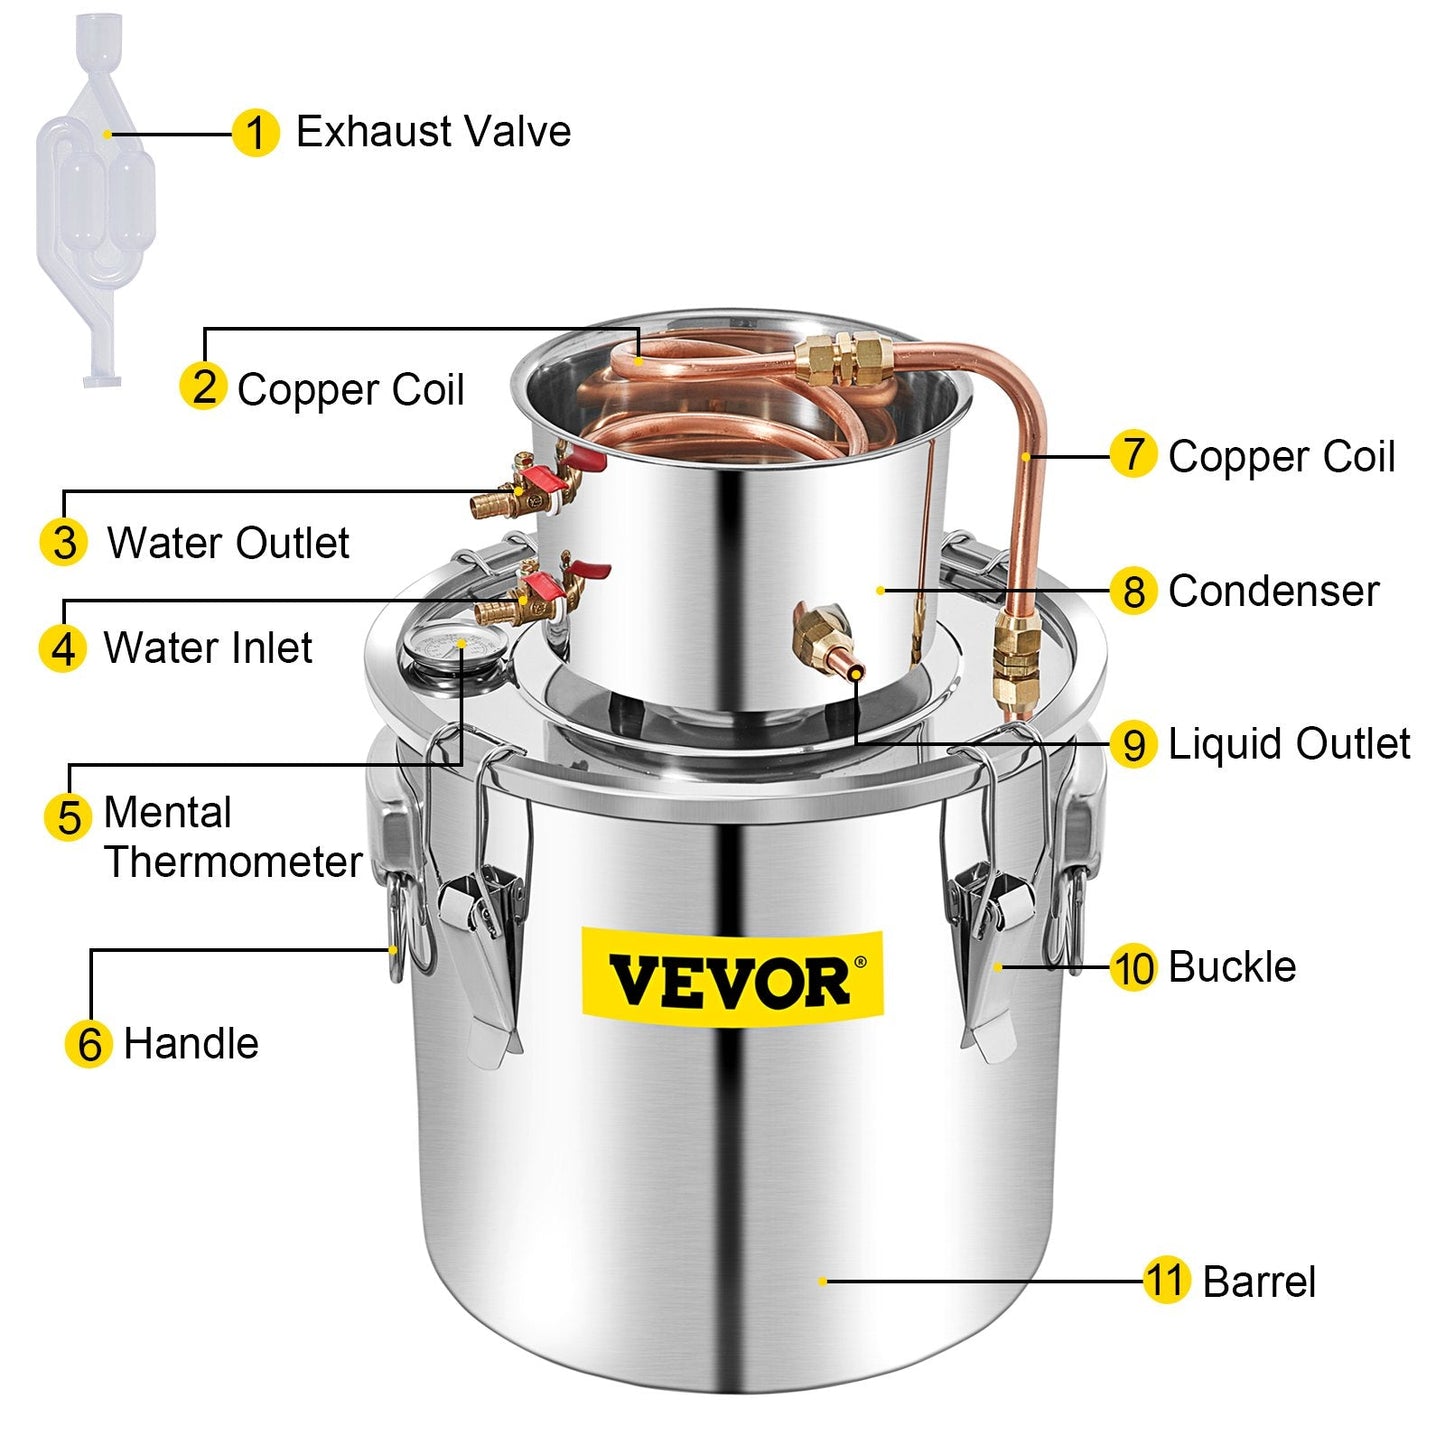 VEVOR Alcohol Still, 50L Distillery Kit w/Condenser & Pump, 13.2Gal Alcohol Still w/Copper Tube, Whiskey Distilling Kit w/Build-in Thermometer, Whiskey Making Kit for DIY Alcohol, Stainless Steel-8